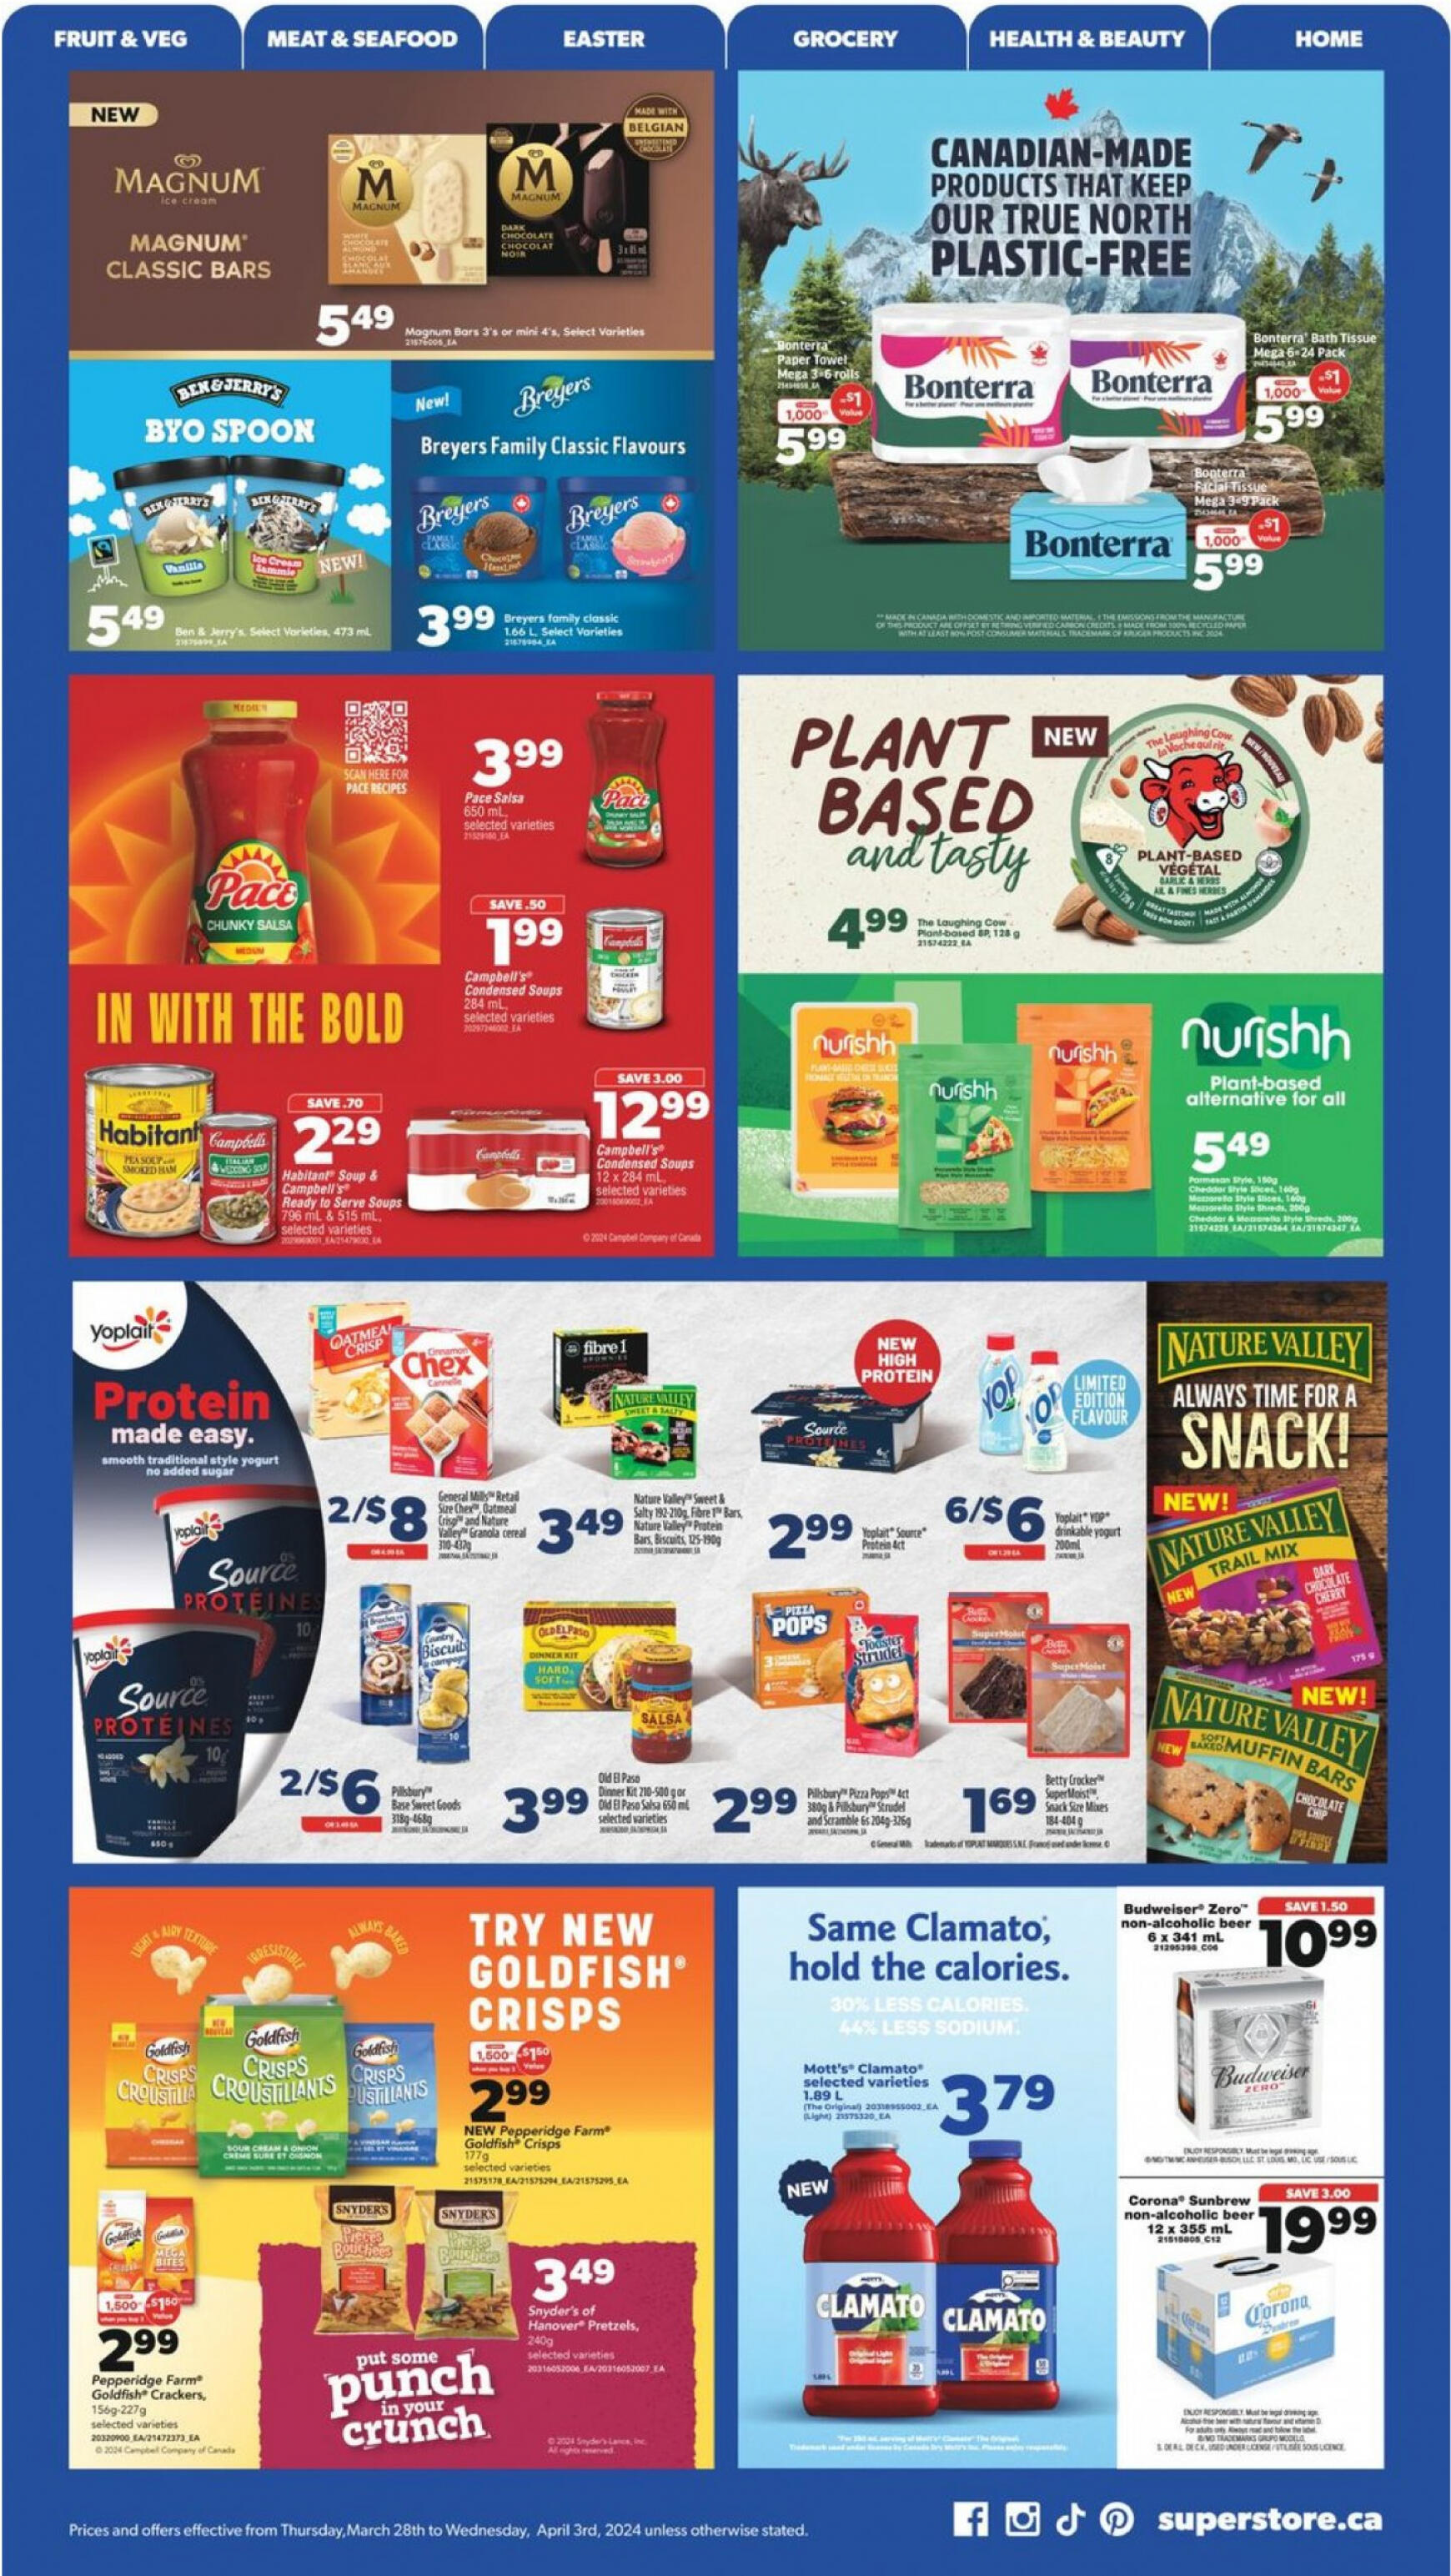 real-canadian-superstore - Real Canadian Superstore flyer current 28.03. - 03.04. - page: 29